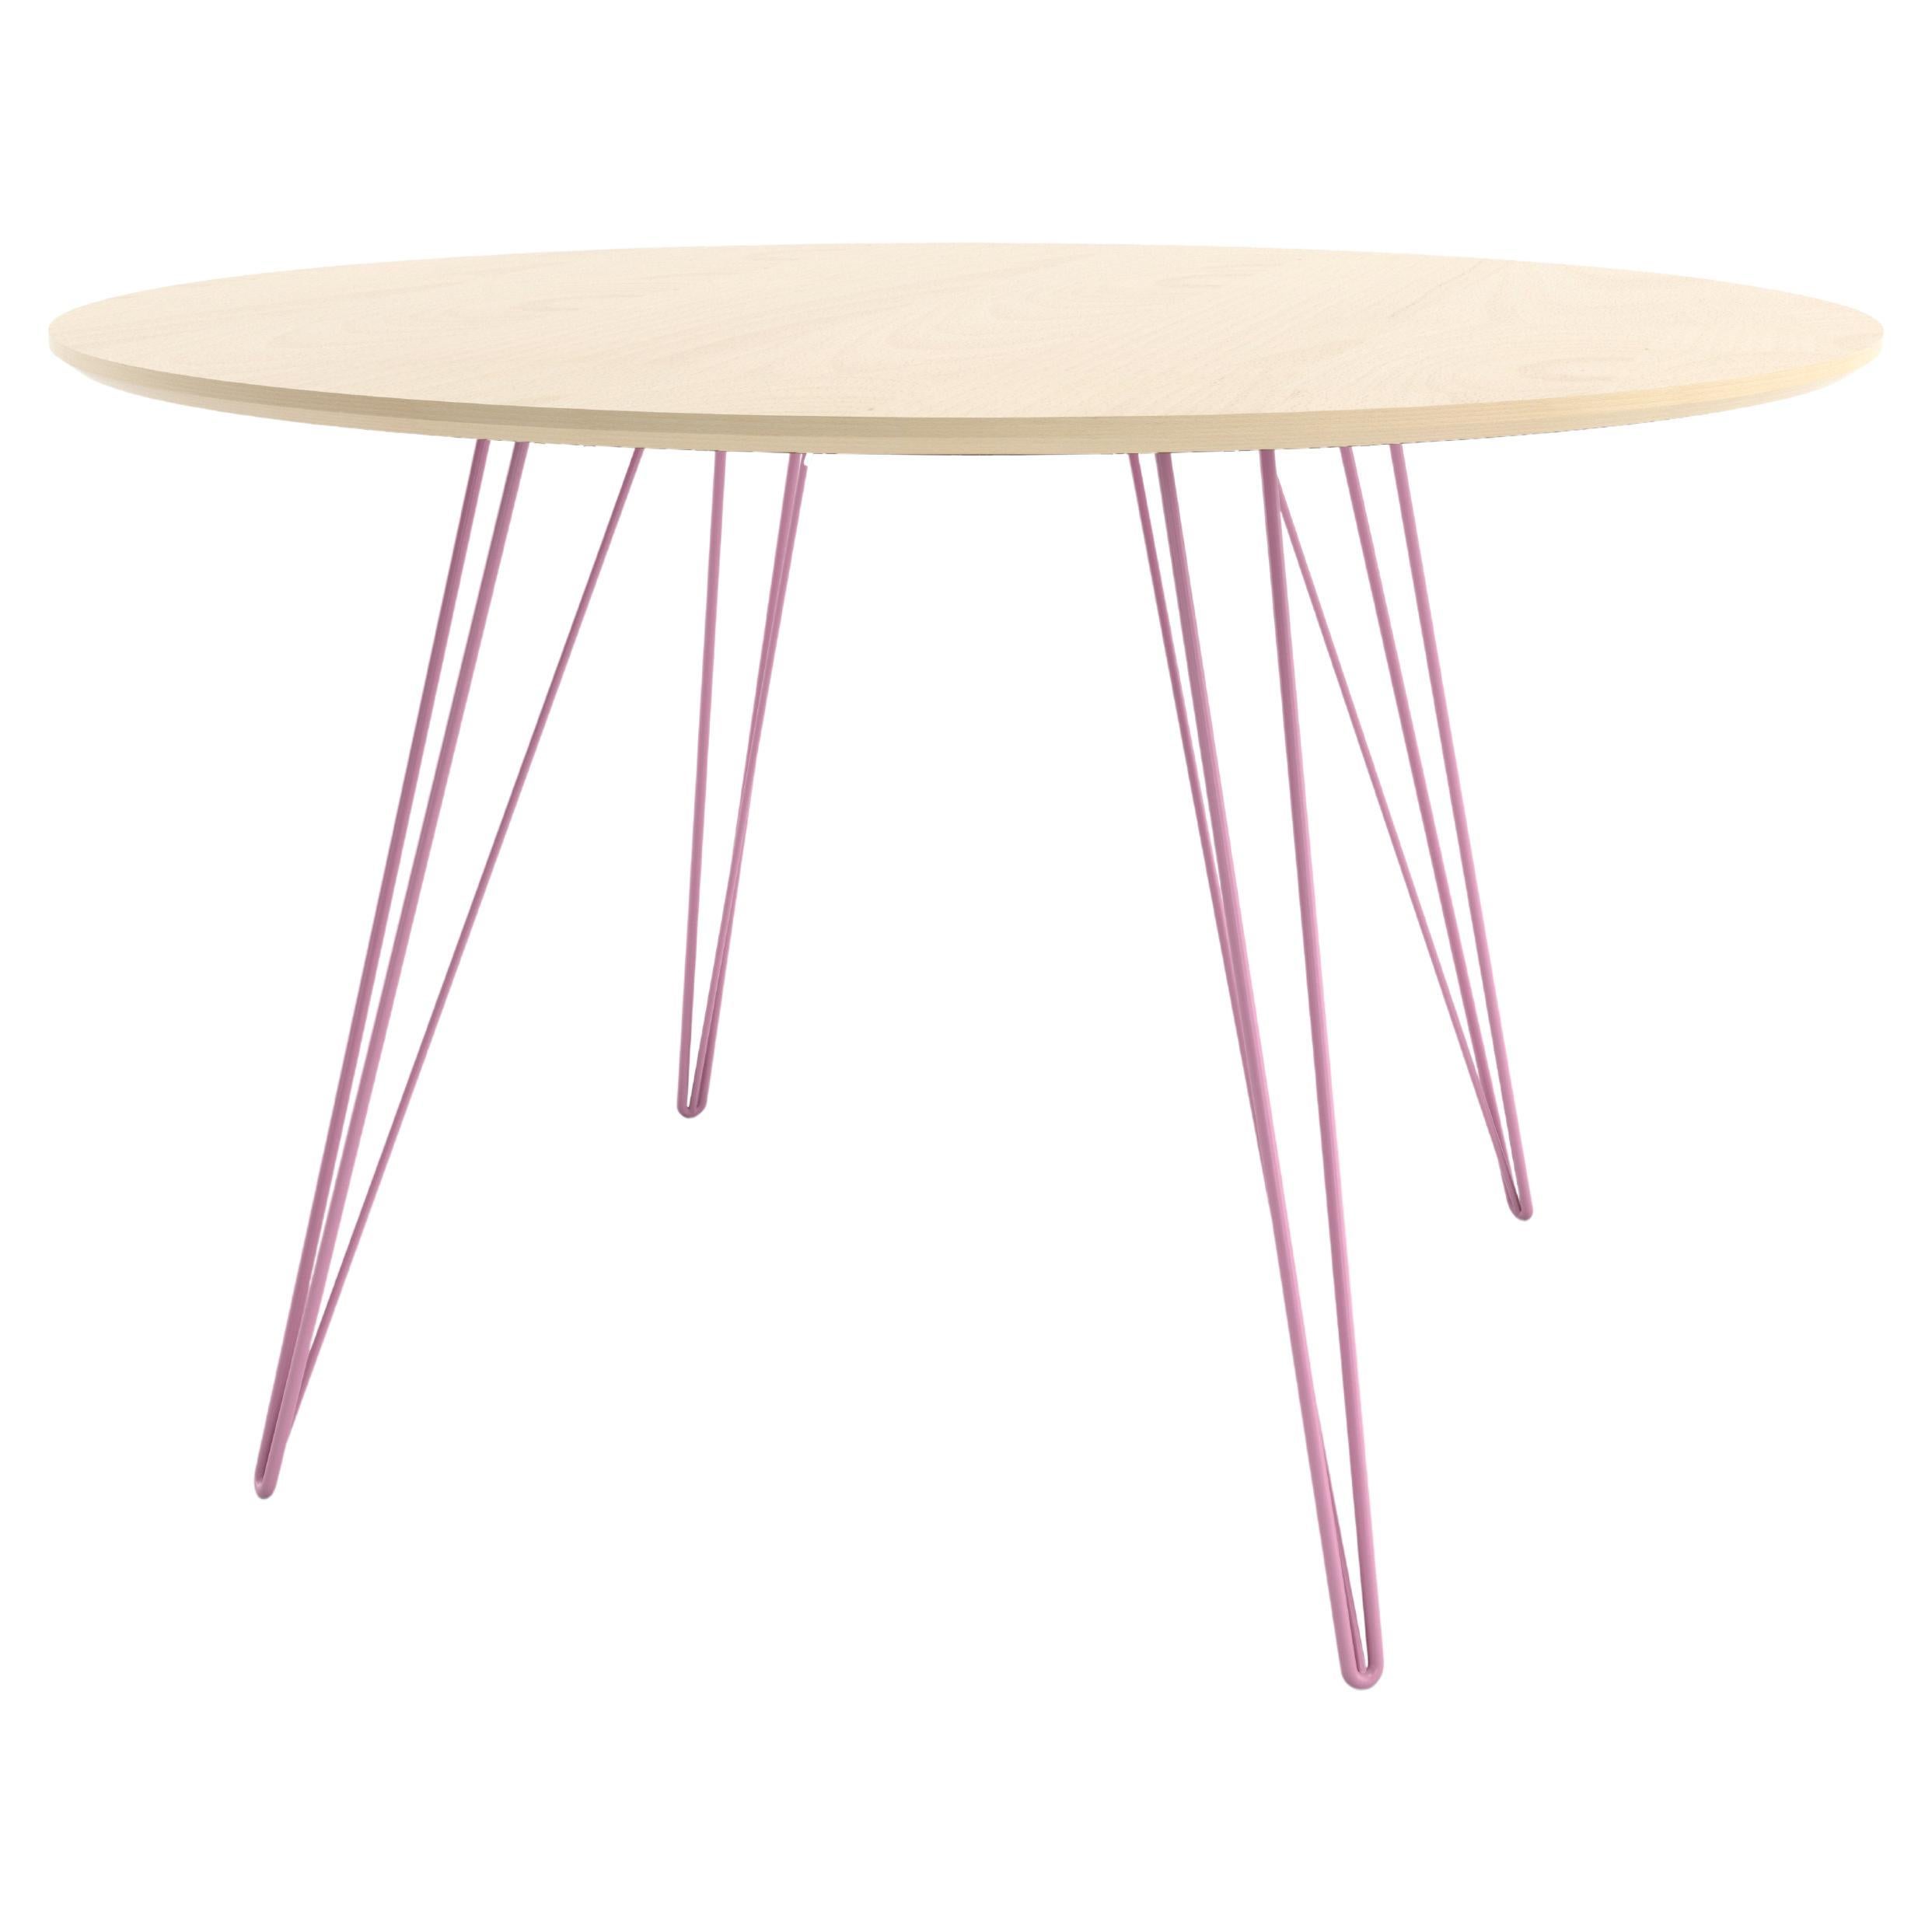 Maple Williams Dining Table Pink Hairpin Legs Oval Top For Sale